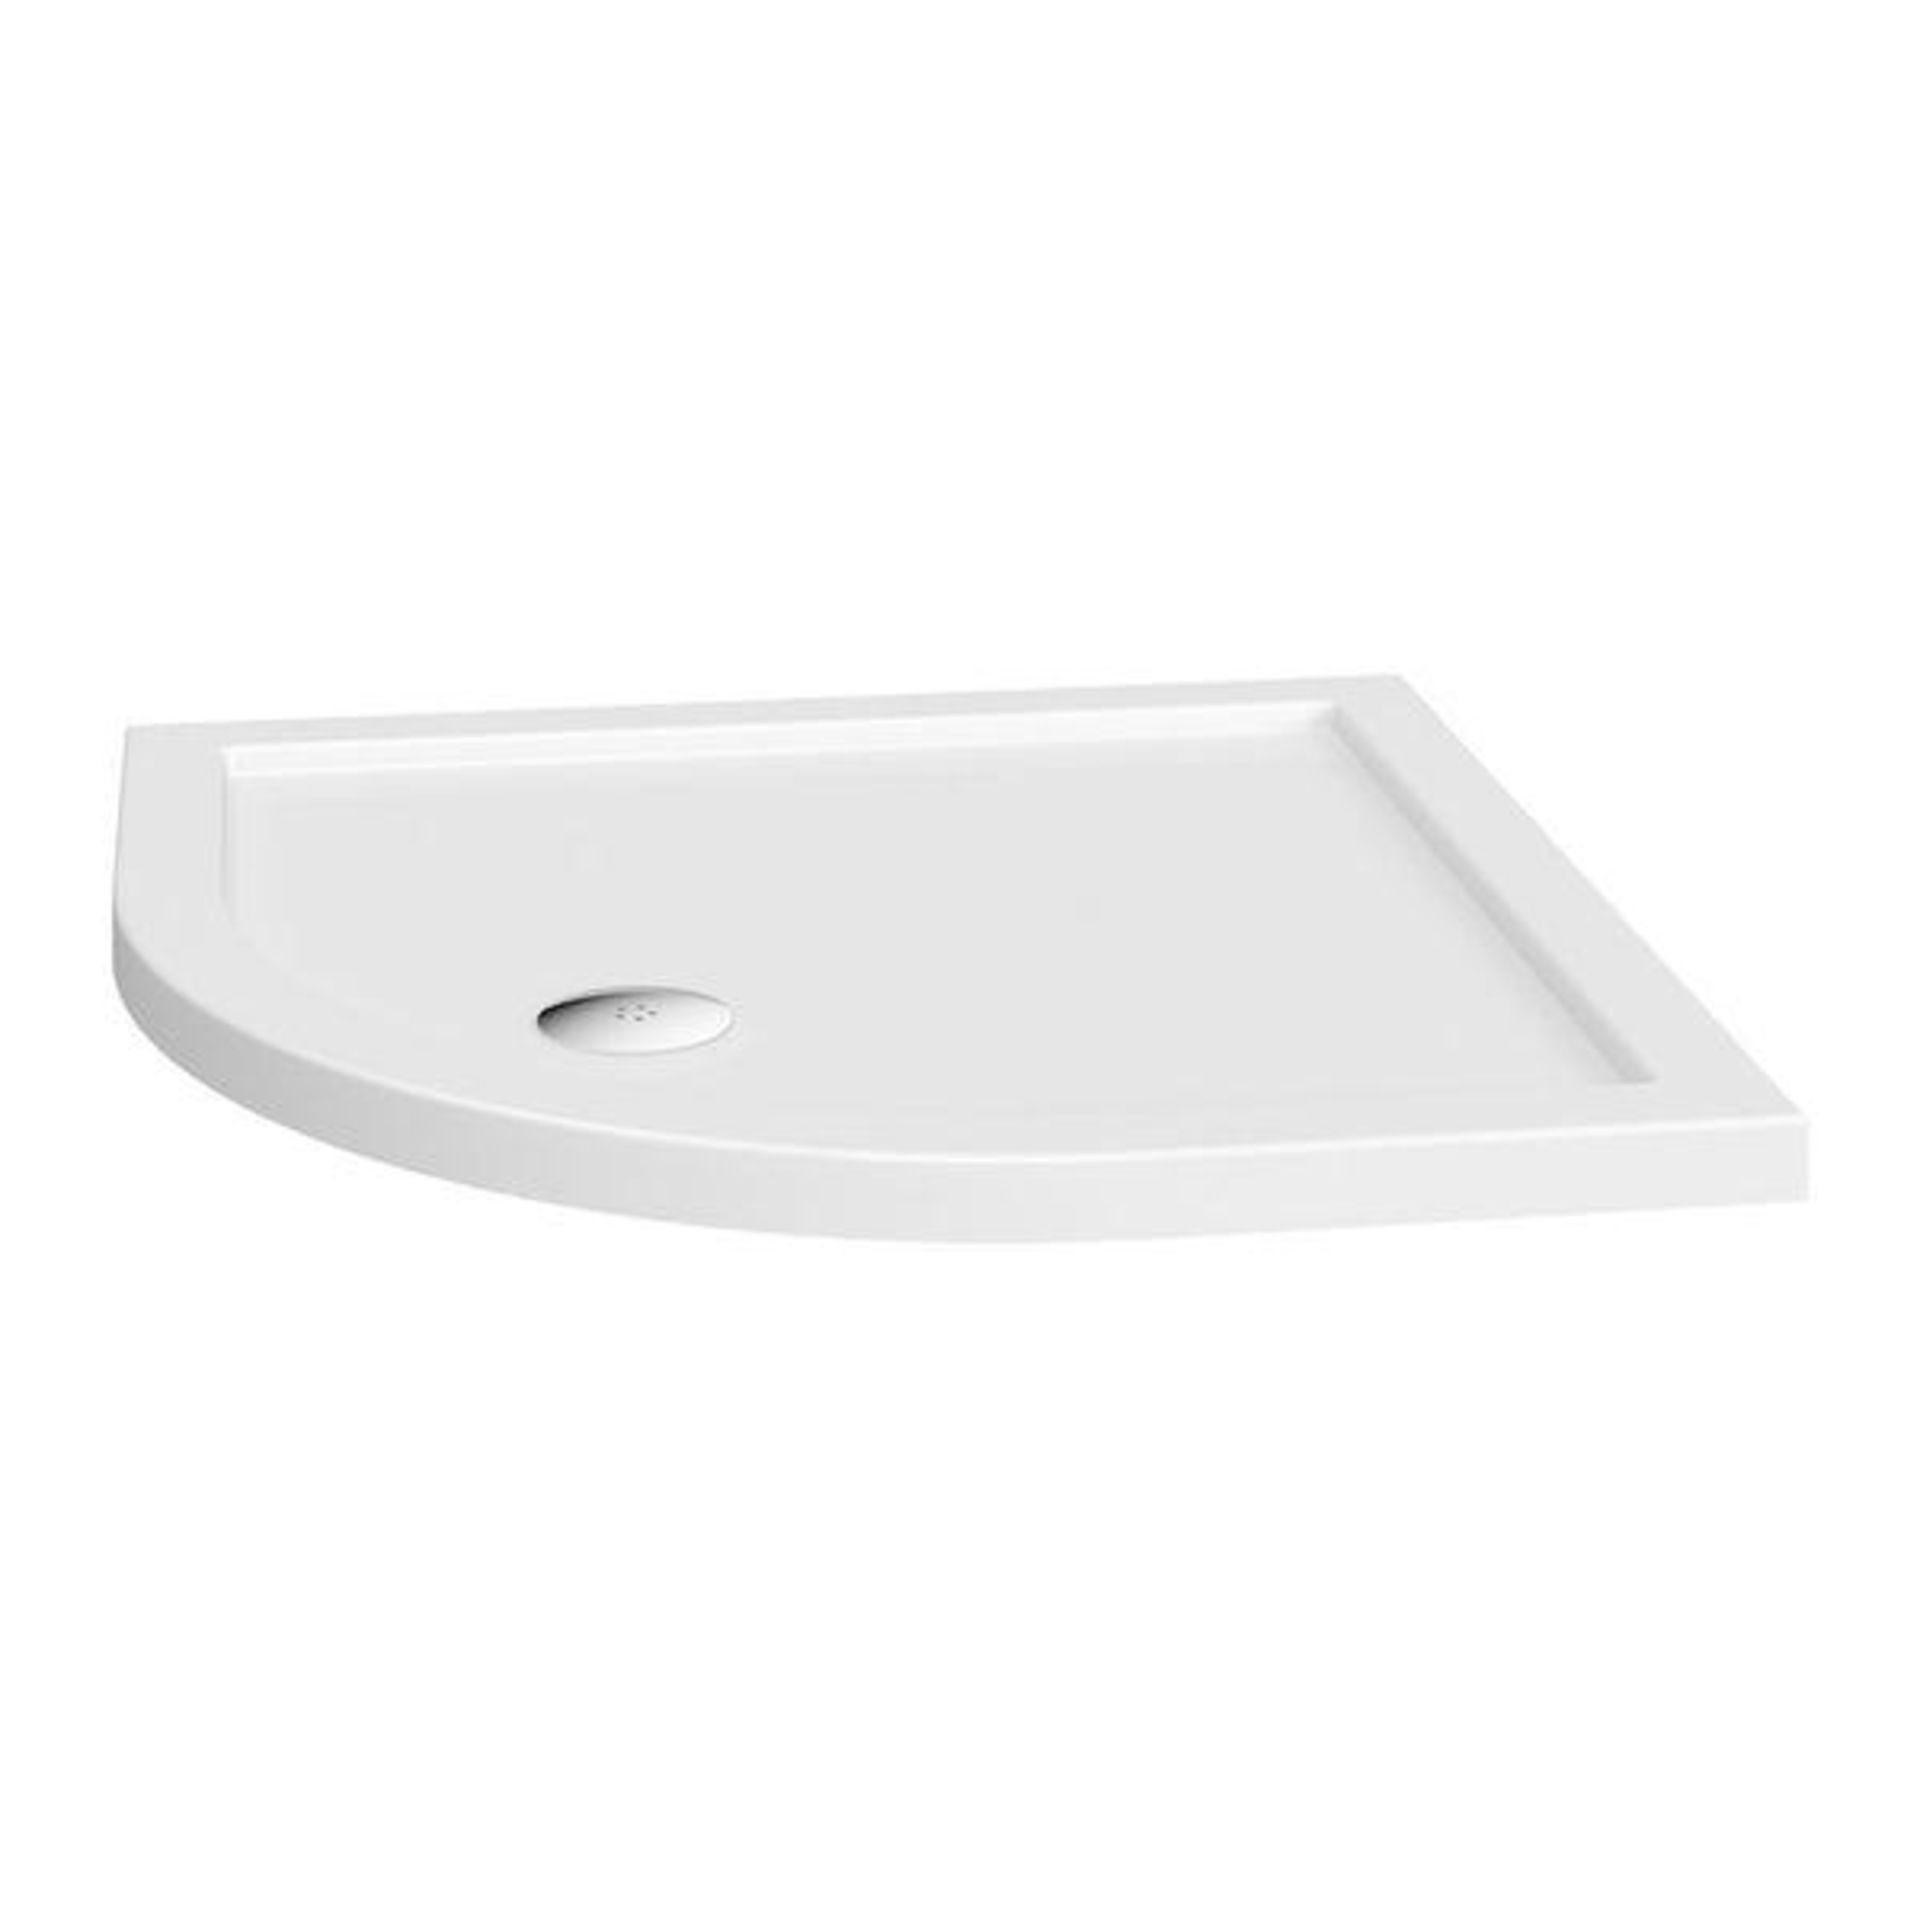 1 x Orchard Quad Slimline Stone Shower Tray - New / Unused Stock - Dimensions: 900 x 900 x 40mm - CL - Image 3 of 4